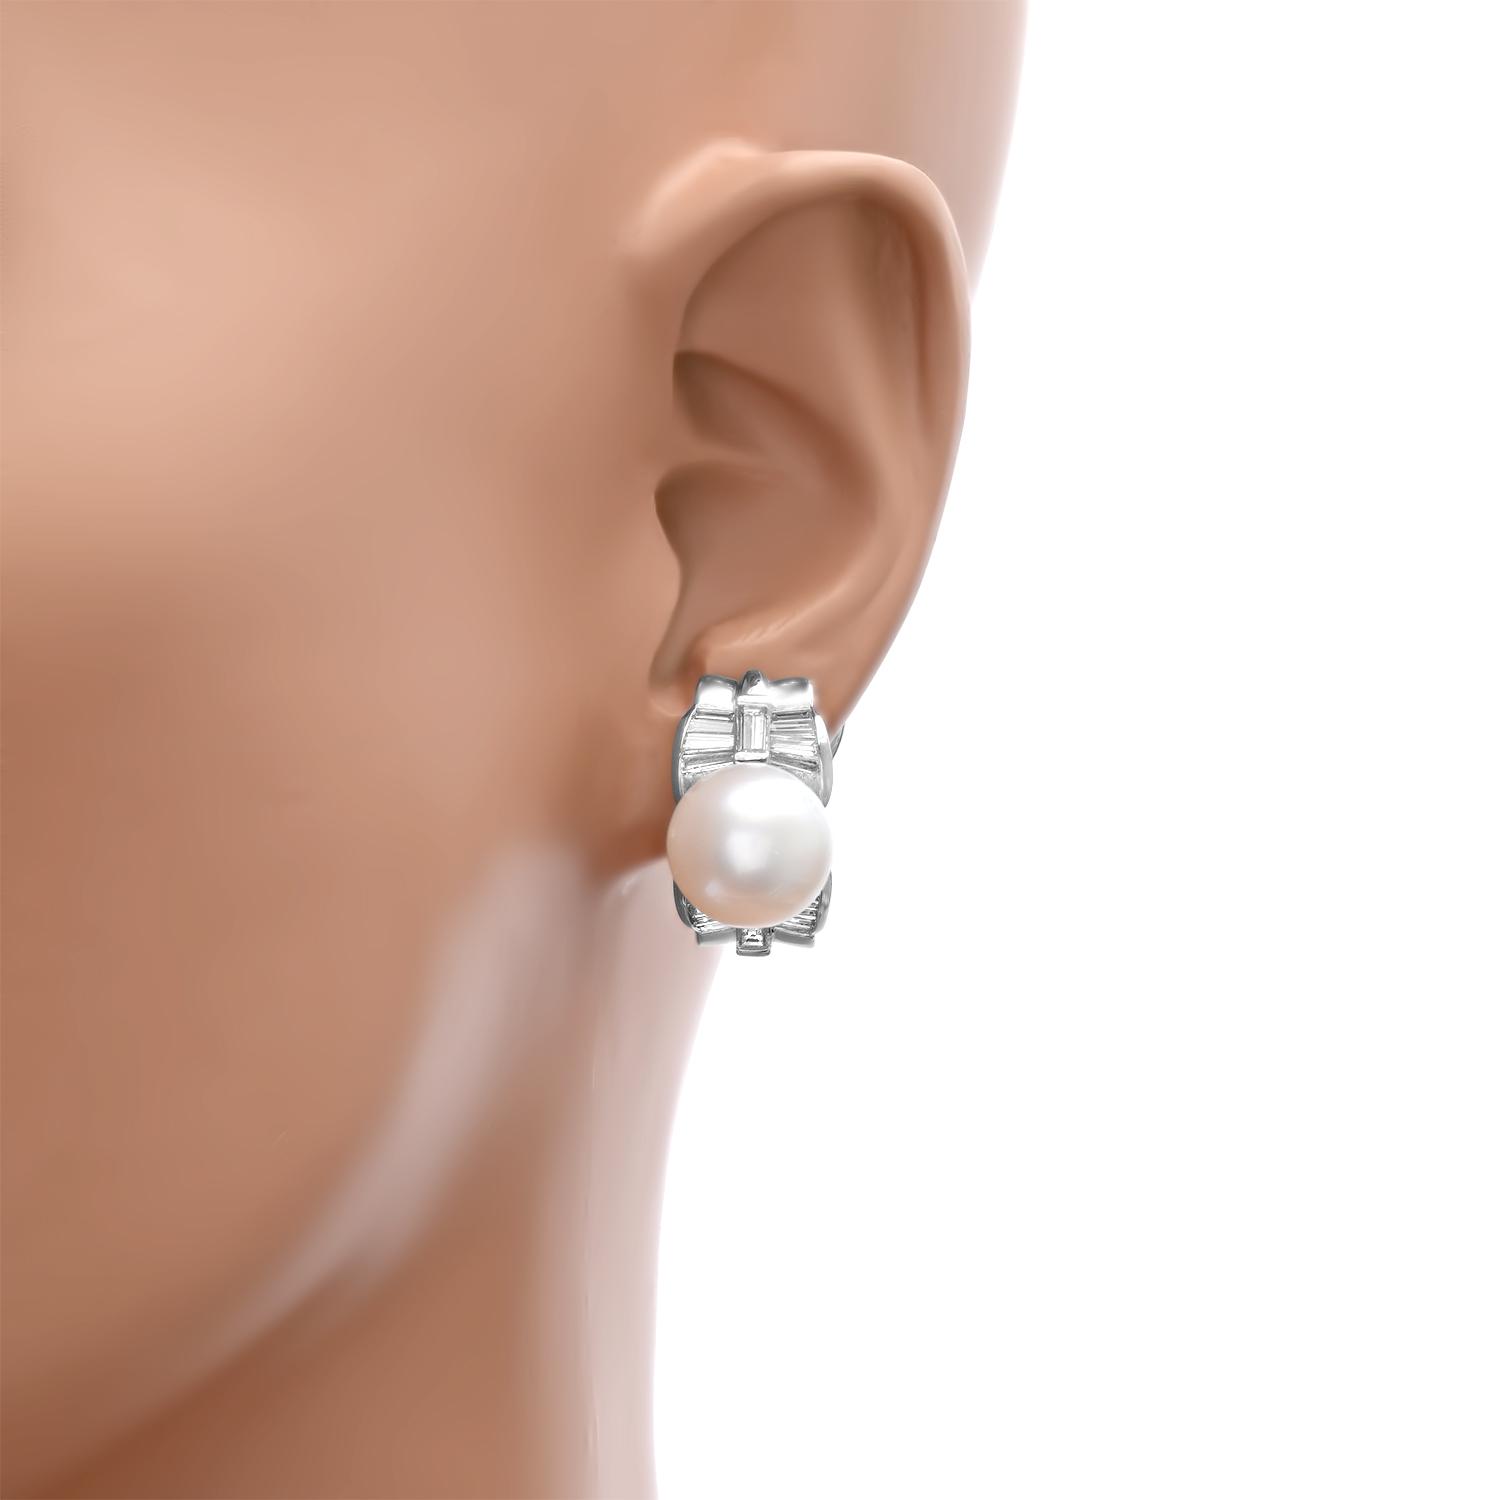 Platinum Setting with 12mm White Pearls and 1.49ct Diamond Earrings